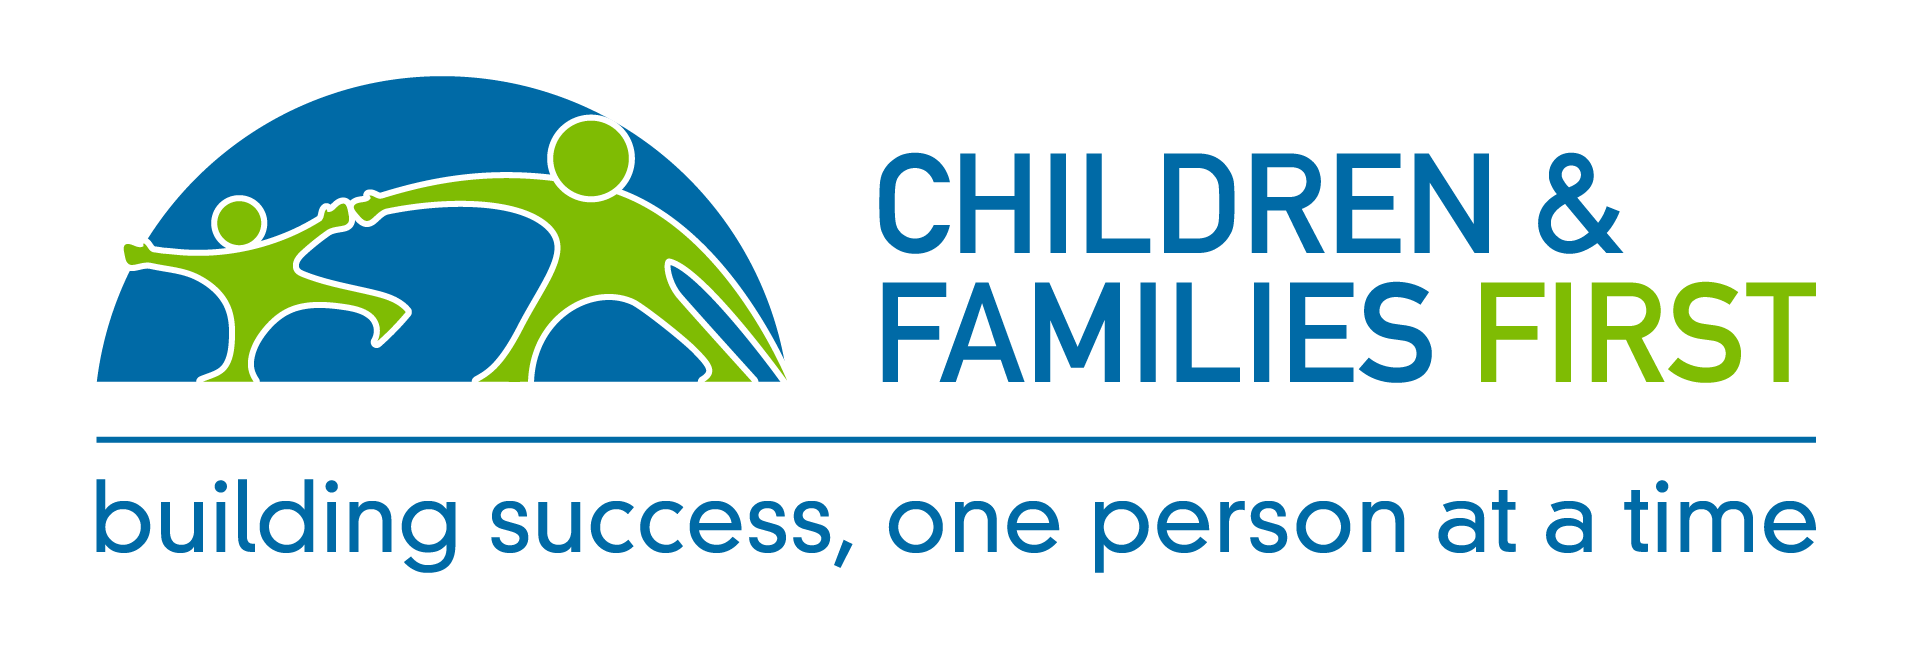 children and families first logo.png